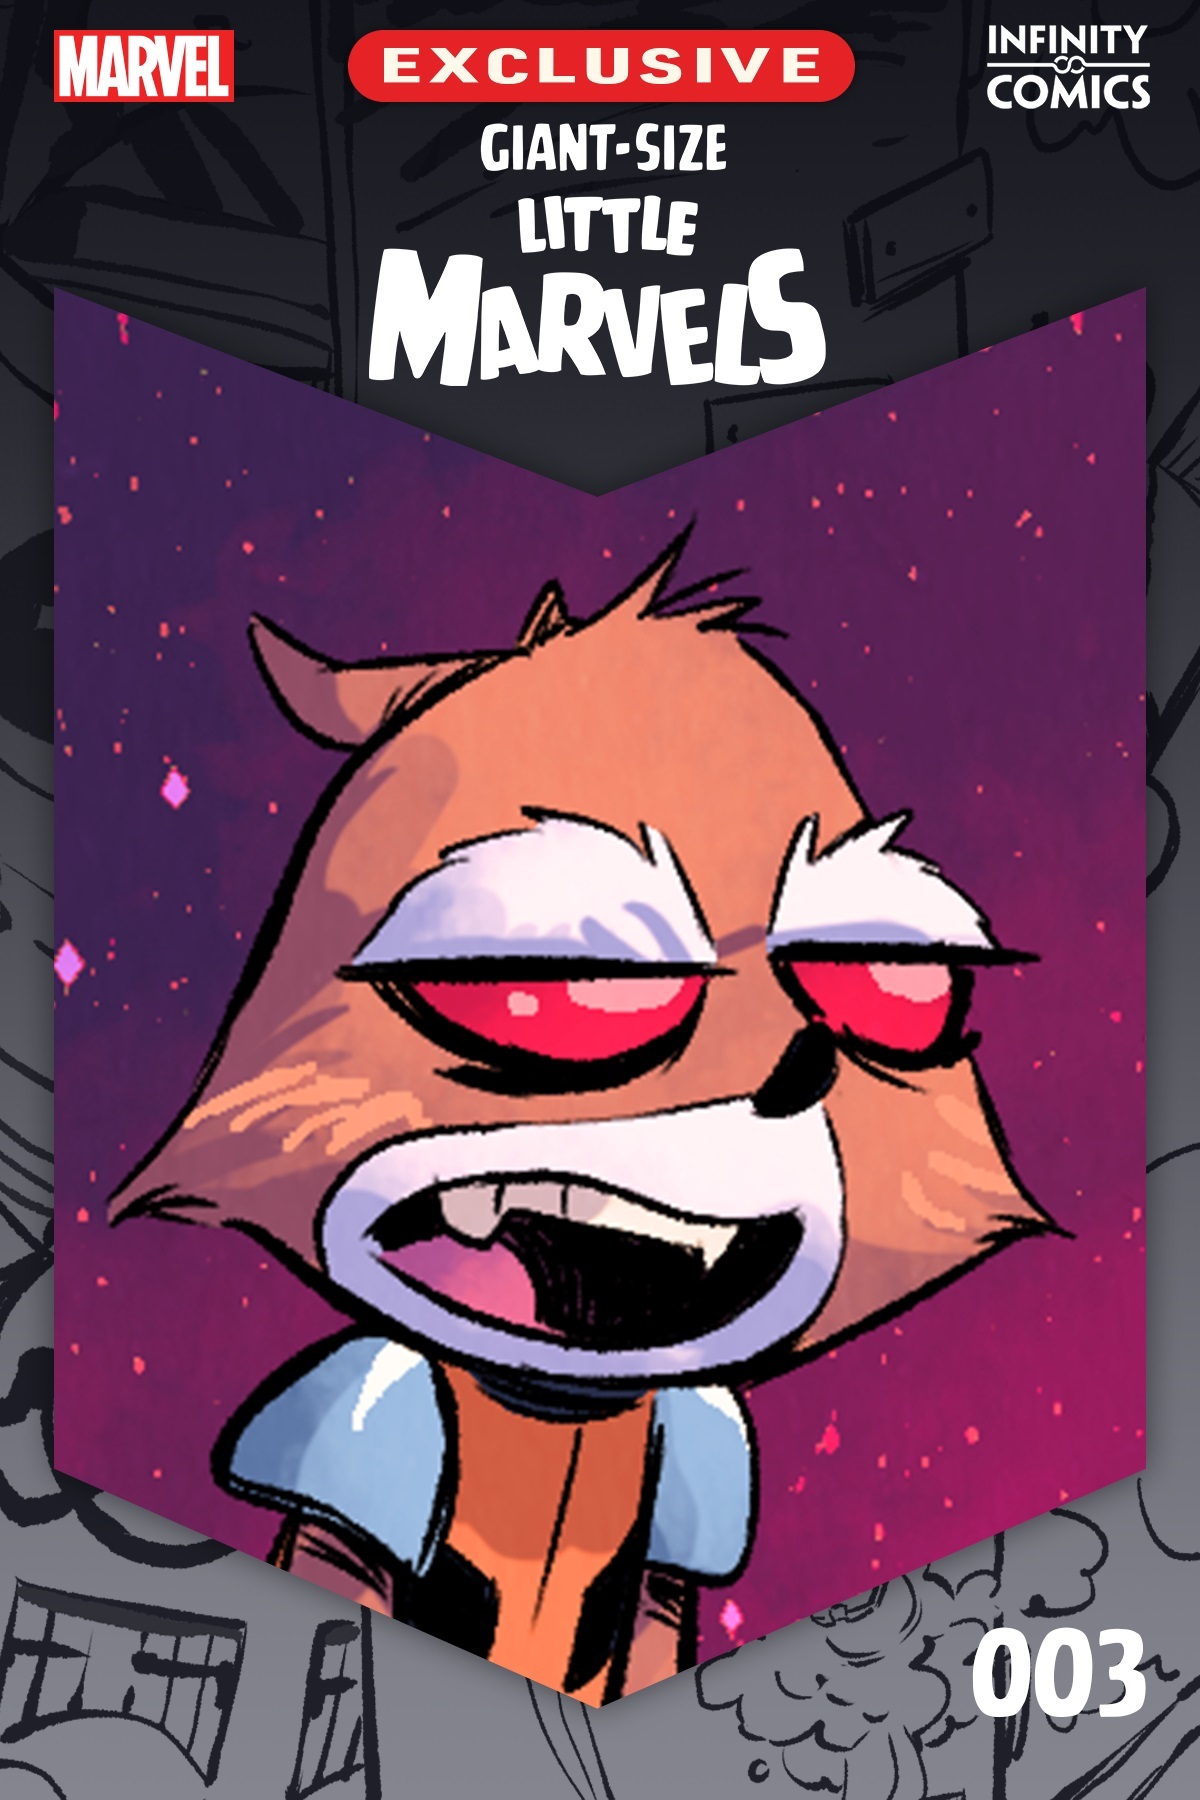 Giant-Size Little Marvels Infinity Comic (2021) #3